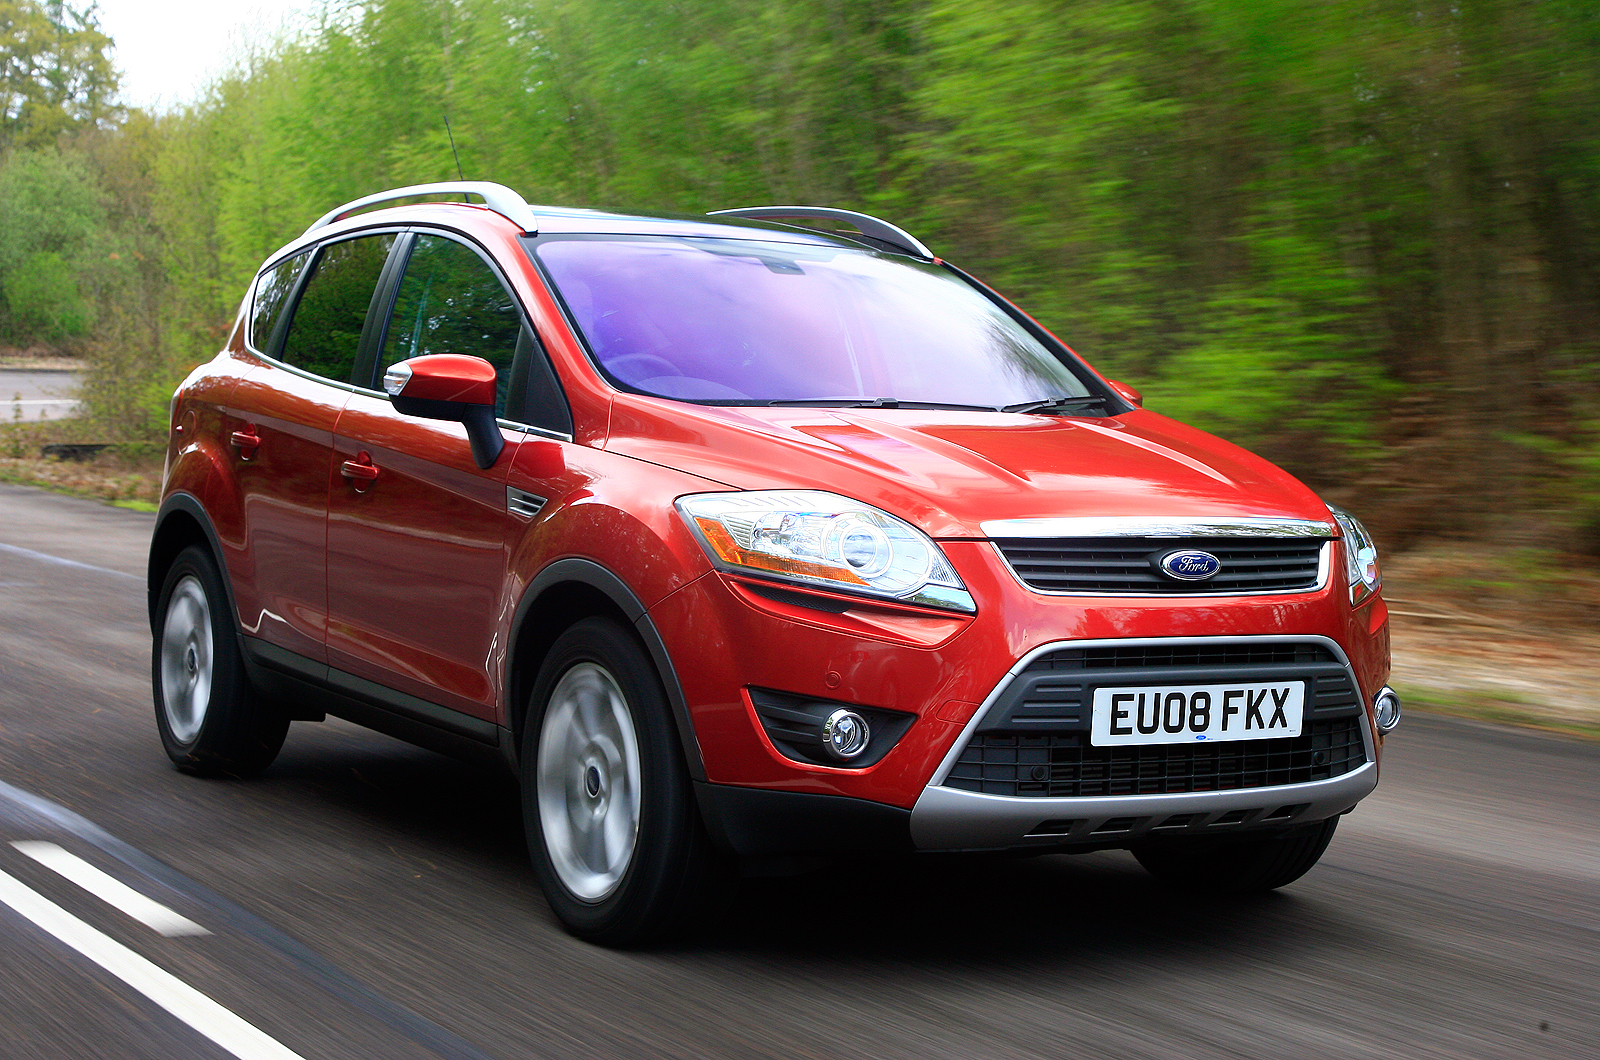 Used Ford Kuga 2008-2013 review